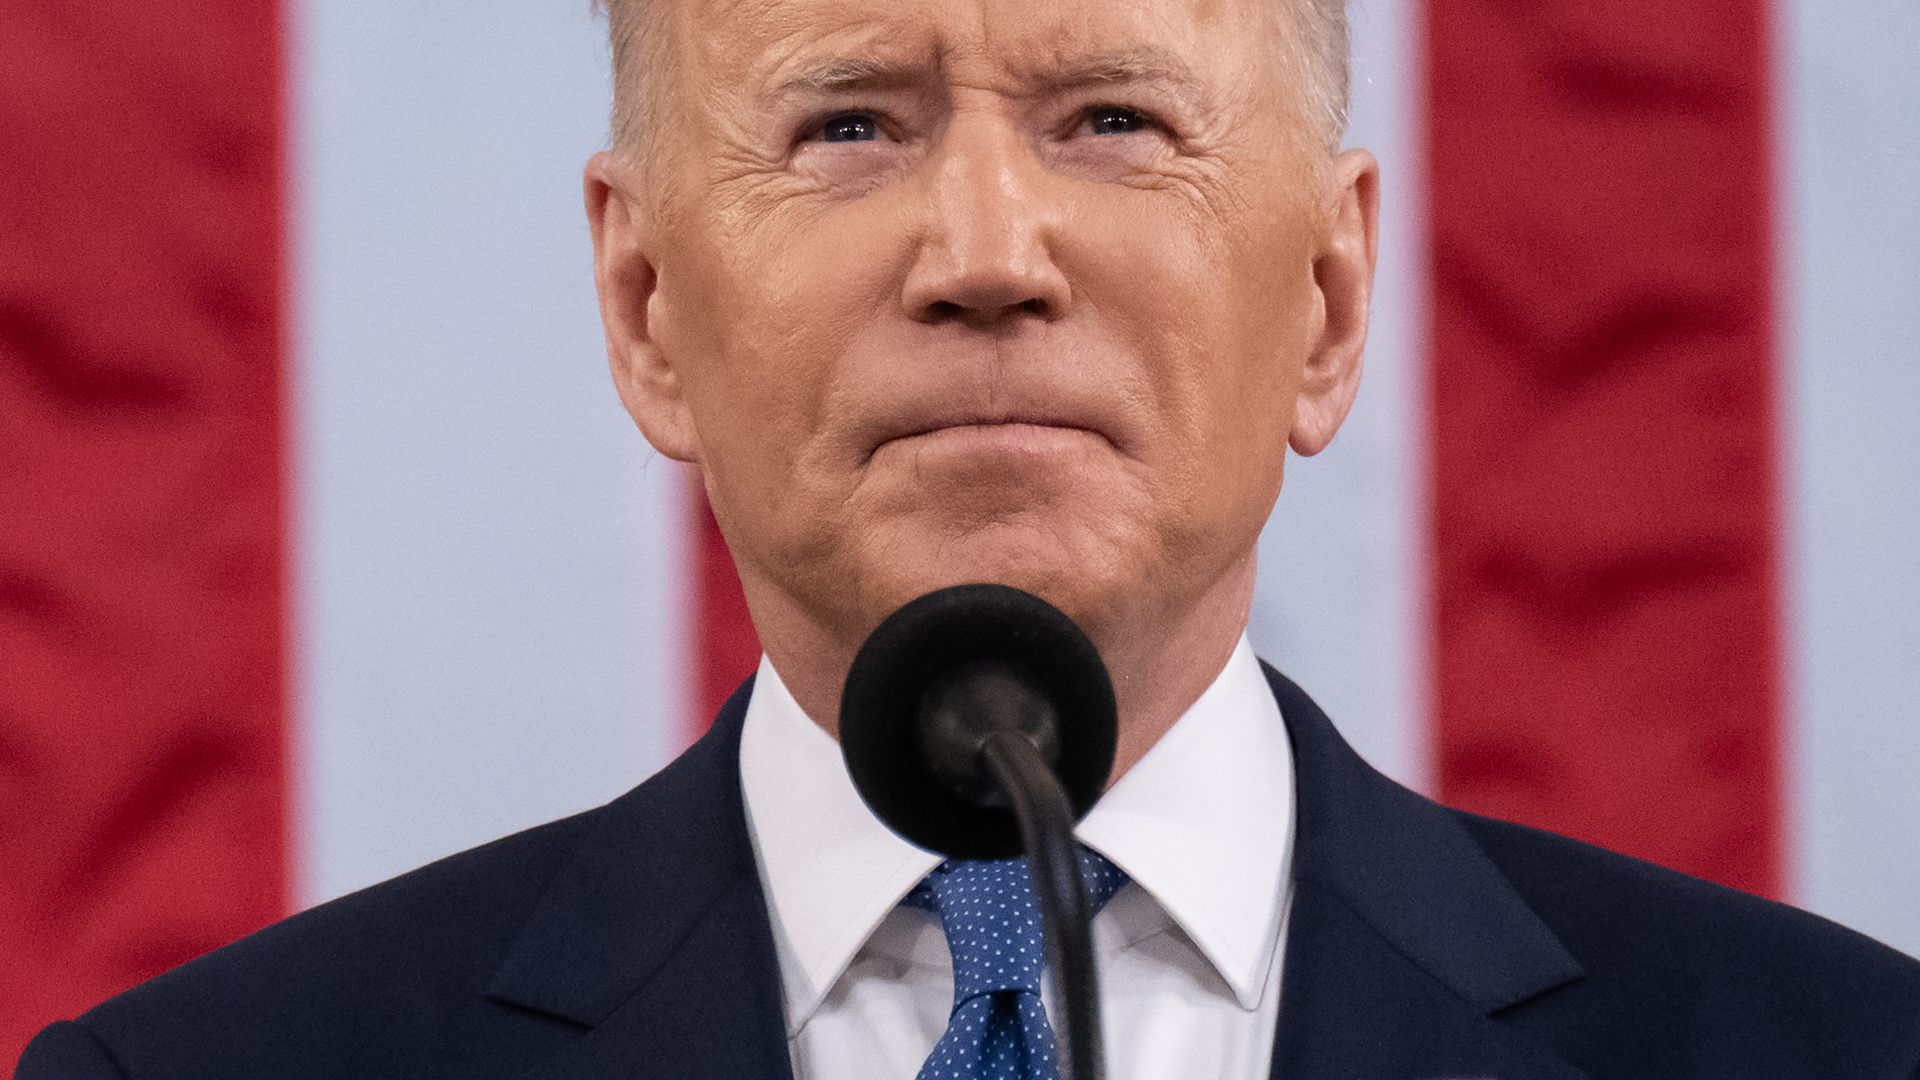 Photo of Joe Biden looking up with his mouth in a firm line